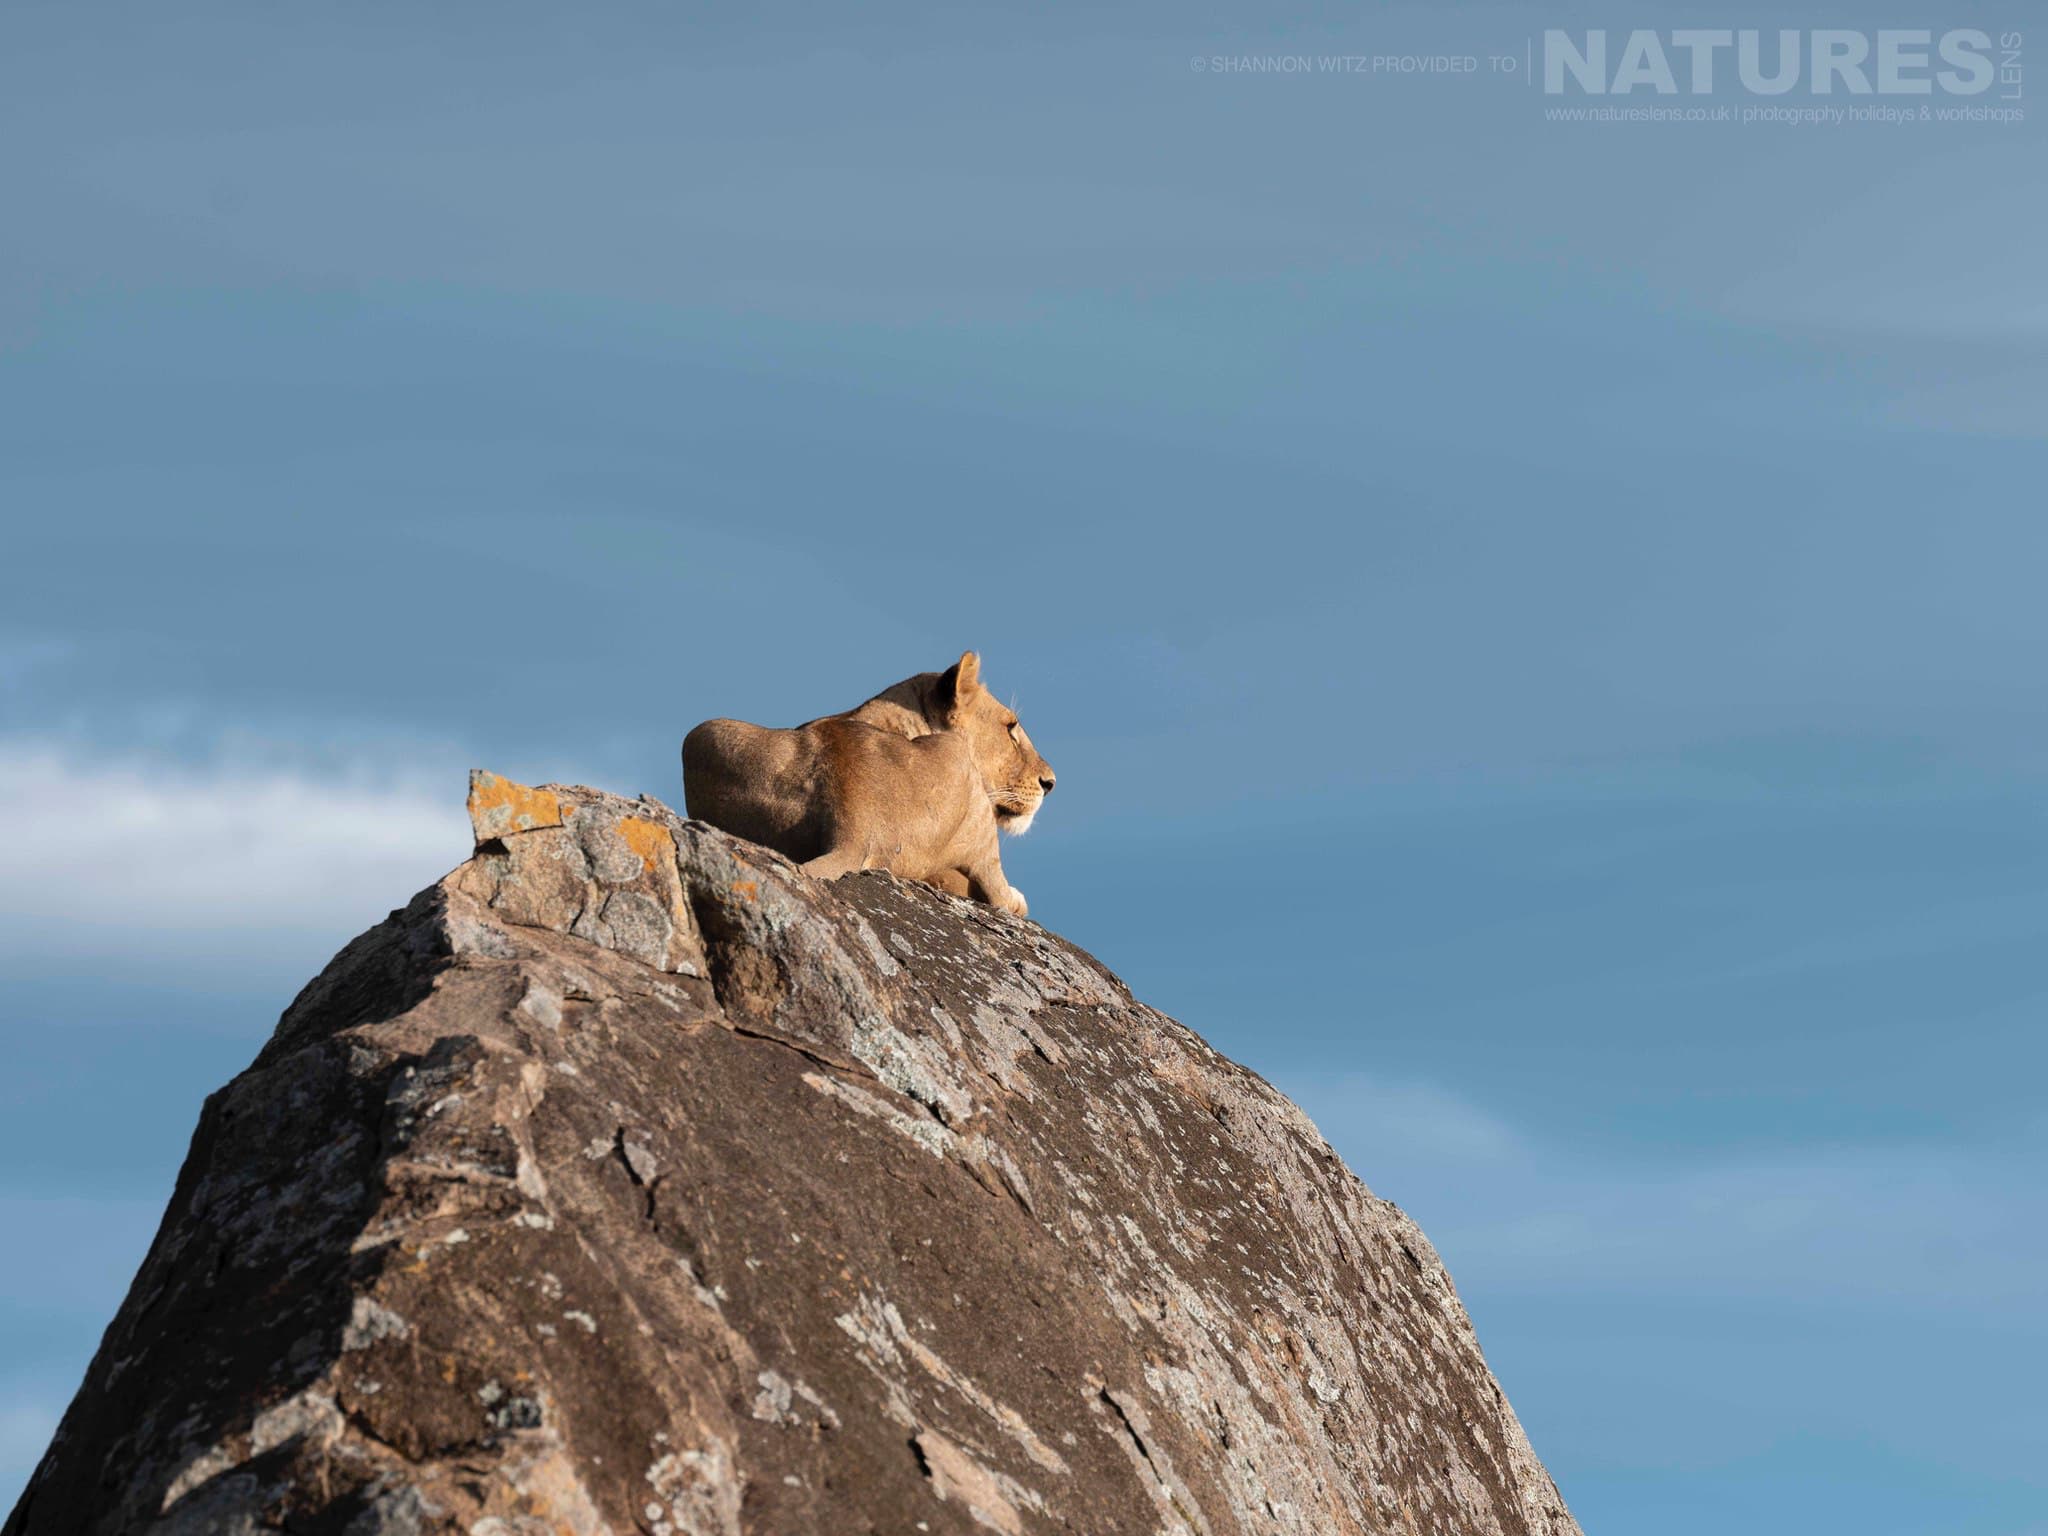 A Resting Lioness On Top On One Of The Granite Kjopes In The Region Of Tanzania That We Use For The Natureslens Wildlife Of The Serengeti Photography Holiday